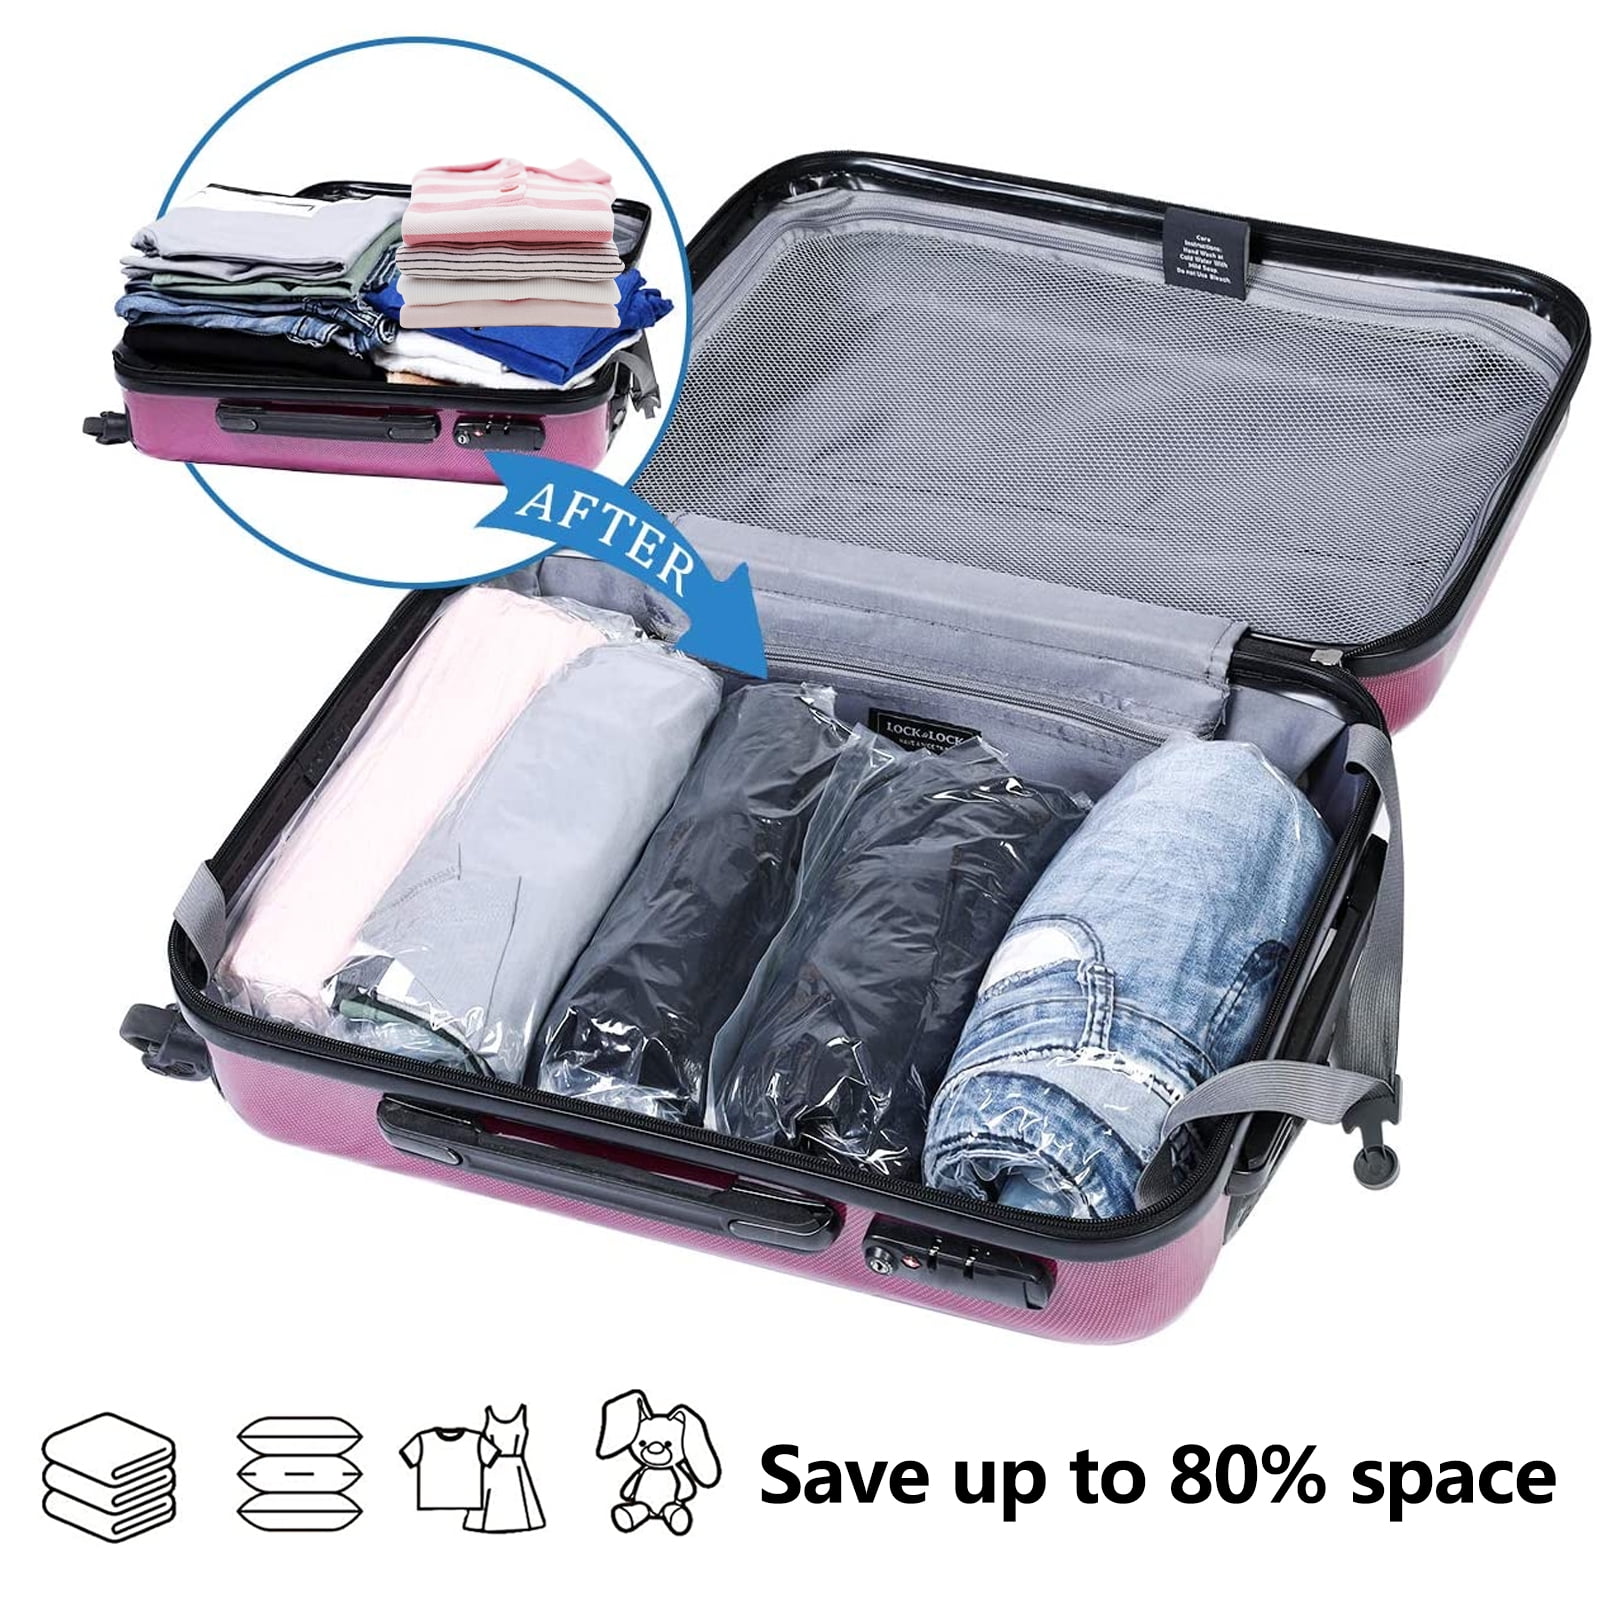 Skycase Travel Space Saver Bags, 4 Pack Roll Up Reusable Travel Space Saver  Vacuum Storage Bags, Waterproof Compression Bags for Travel/Home Storage,  No Pump Needed 